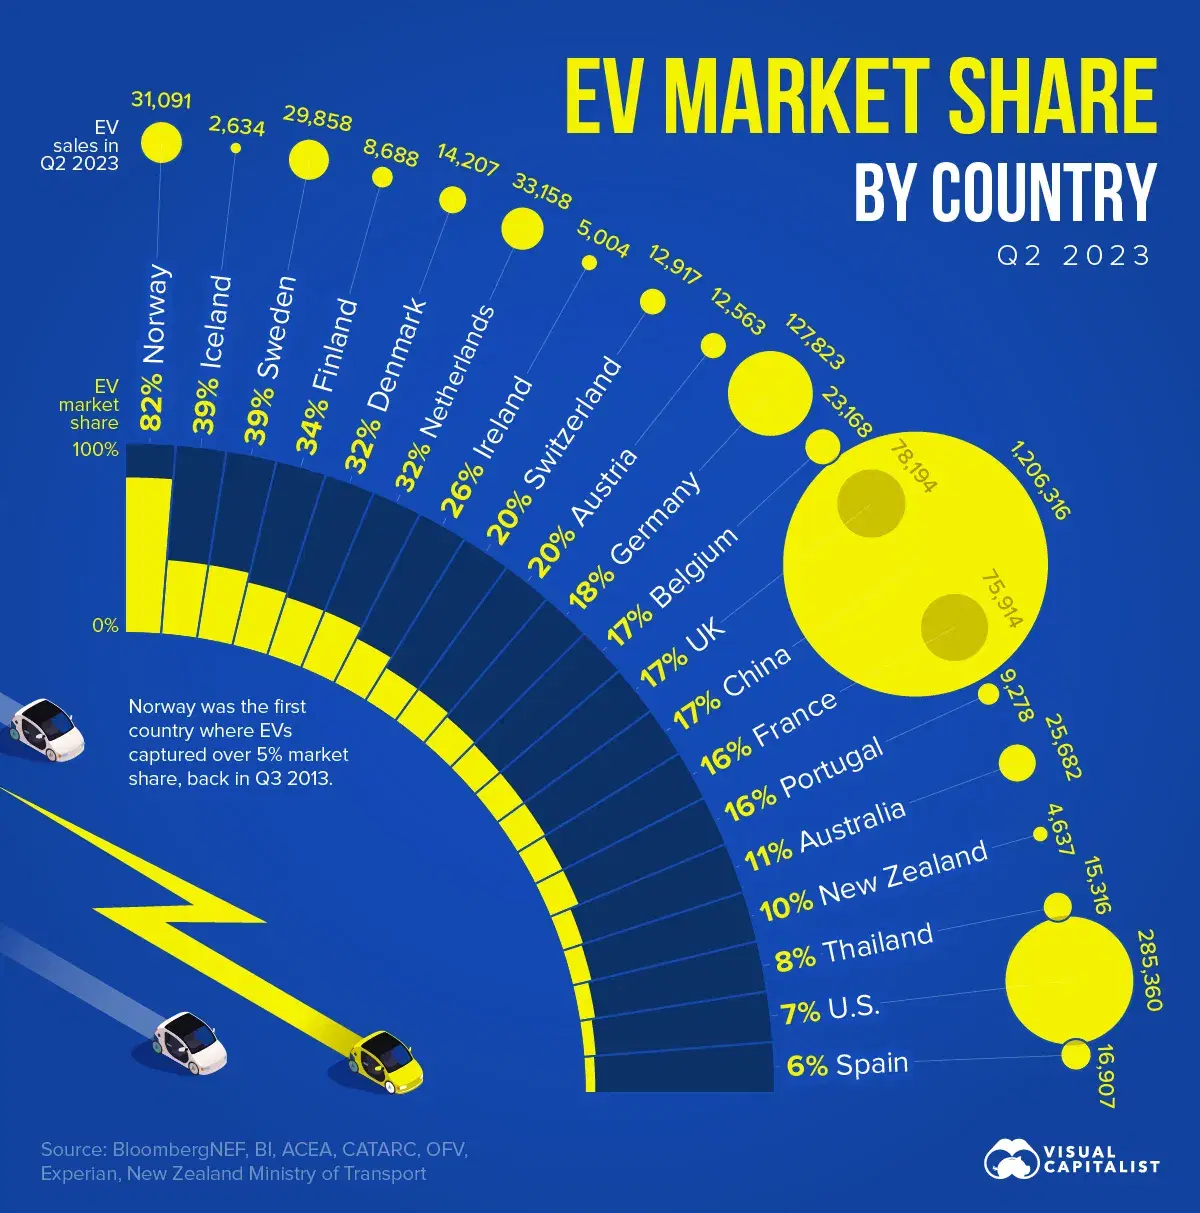 The Top 20 Countries by EV Market Share